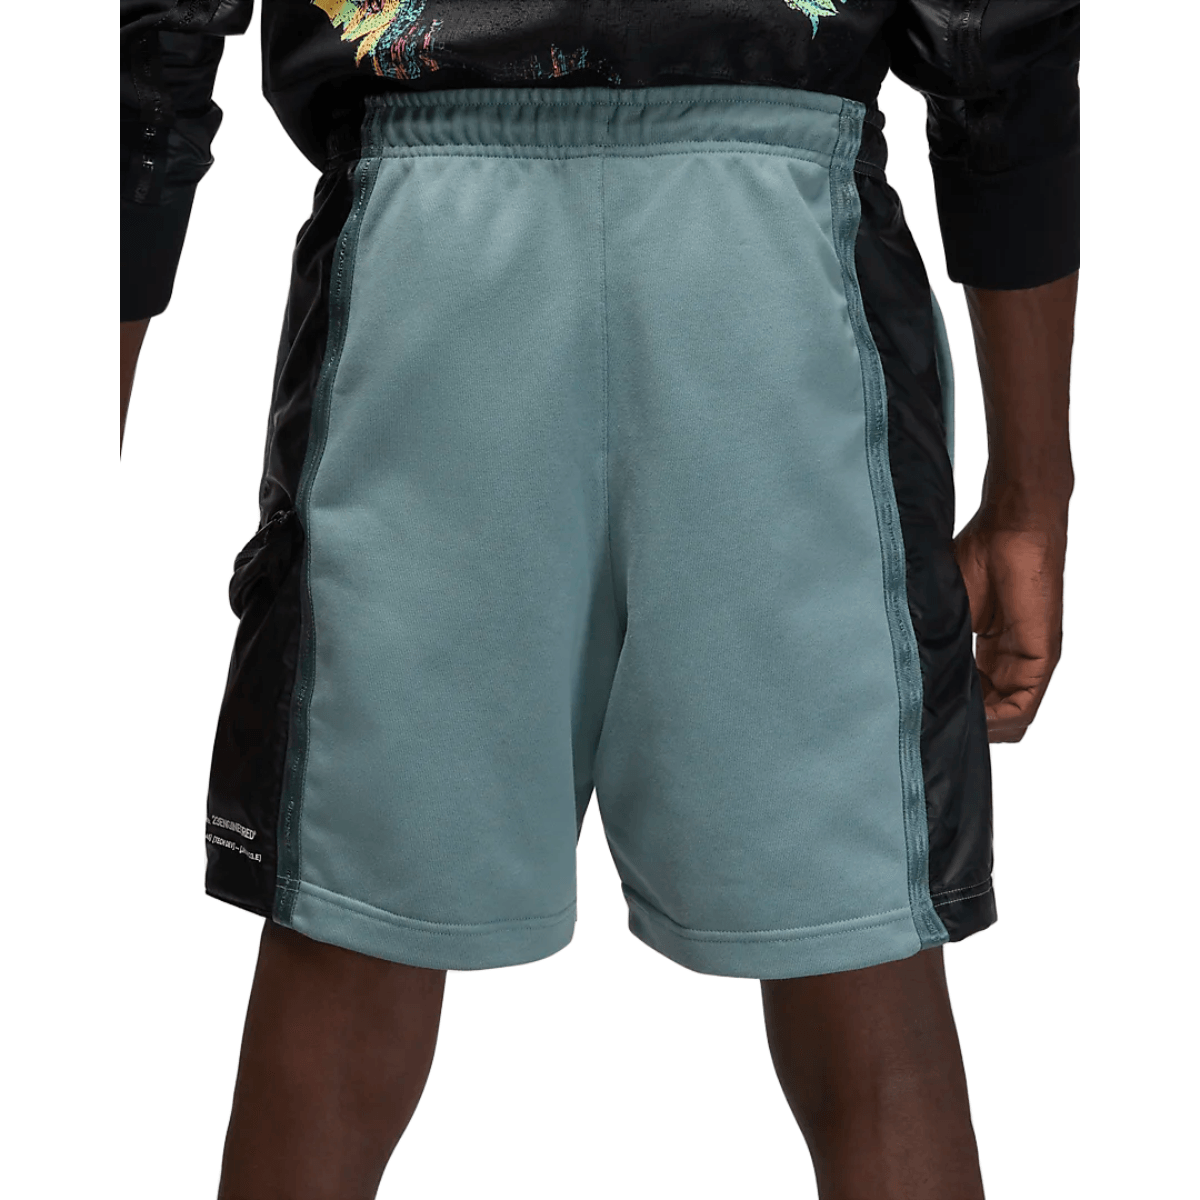 Nike Jordan 23 Engineered Short - Men's - Al's Sporting Goods: Your  One-Stop Shop for Outdoor Sports Gear & Apparel